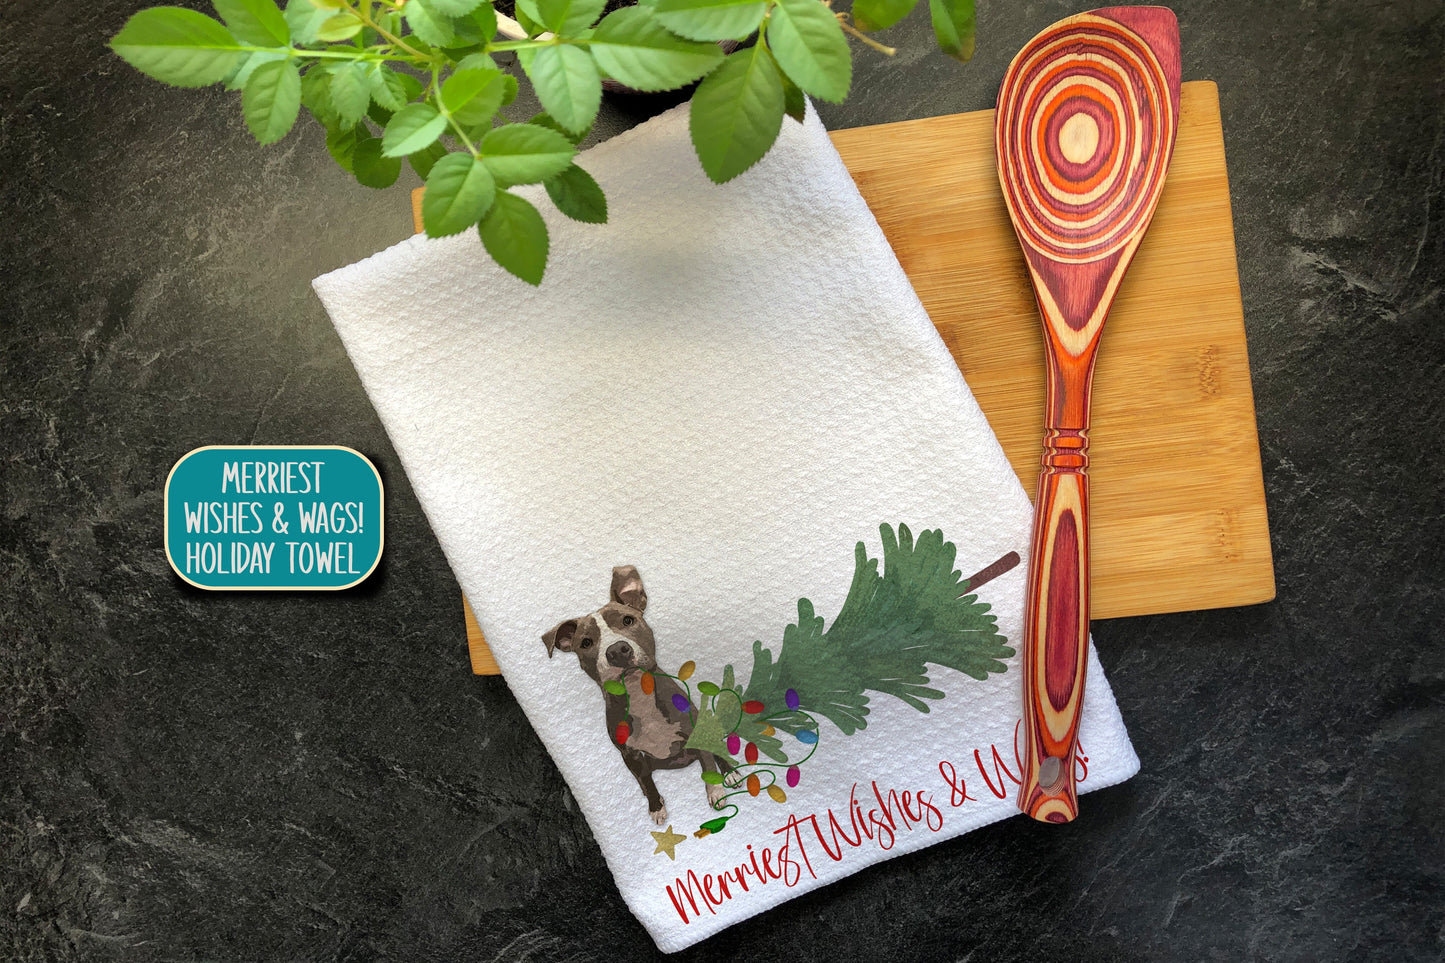 Pitbull Gifts, Christmas Tea Towel, Merry Wishes & Wags, Christmas Hand Towel, Funny Kitchen Towel, Funny Christmas Gift for Pitbull Mom